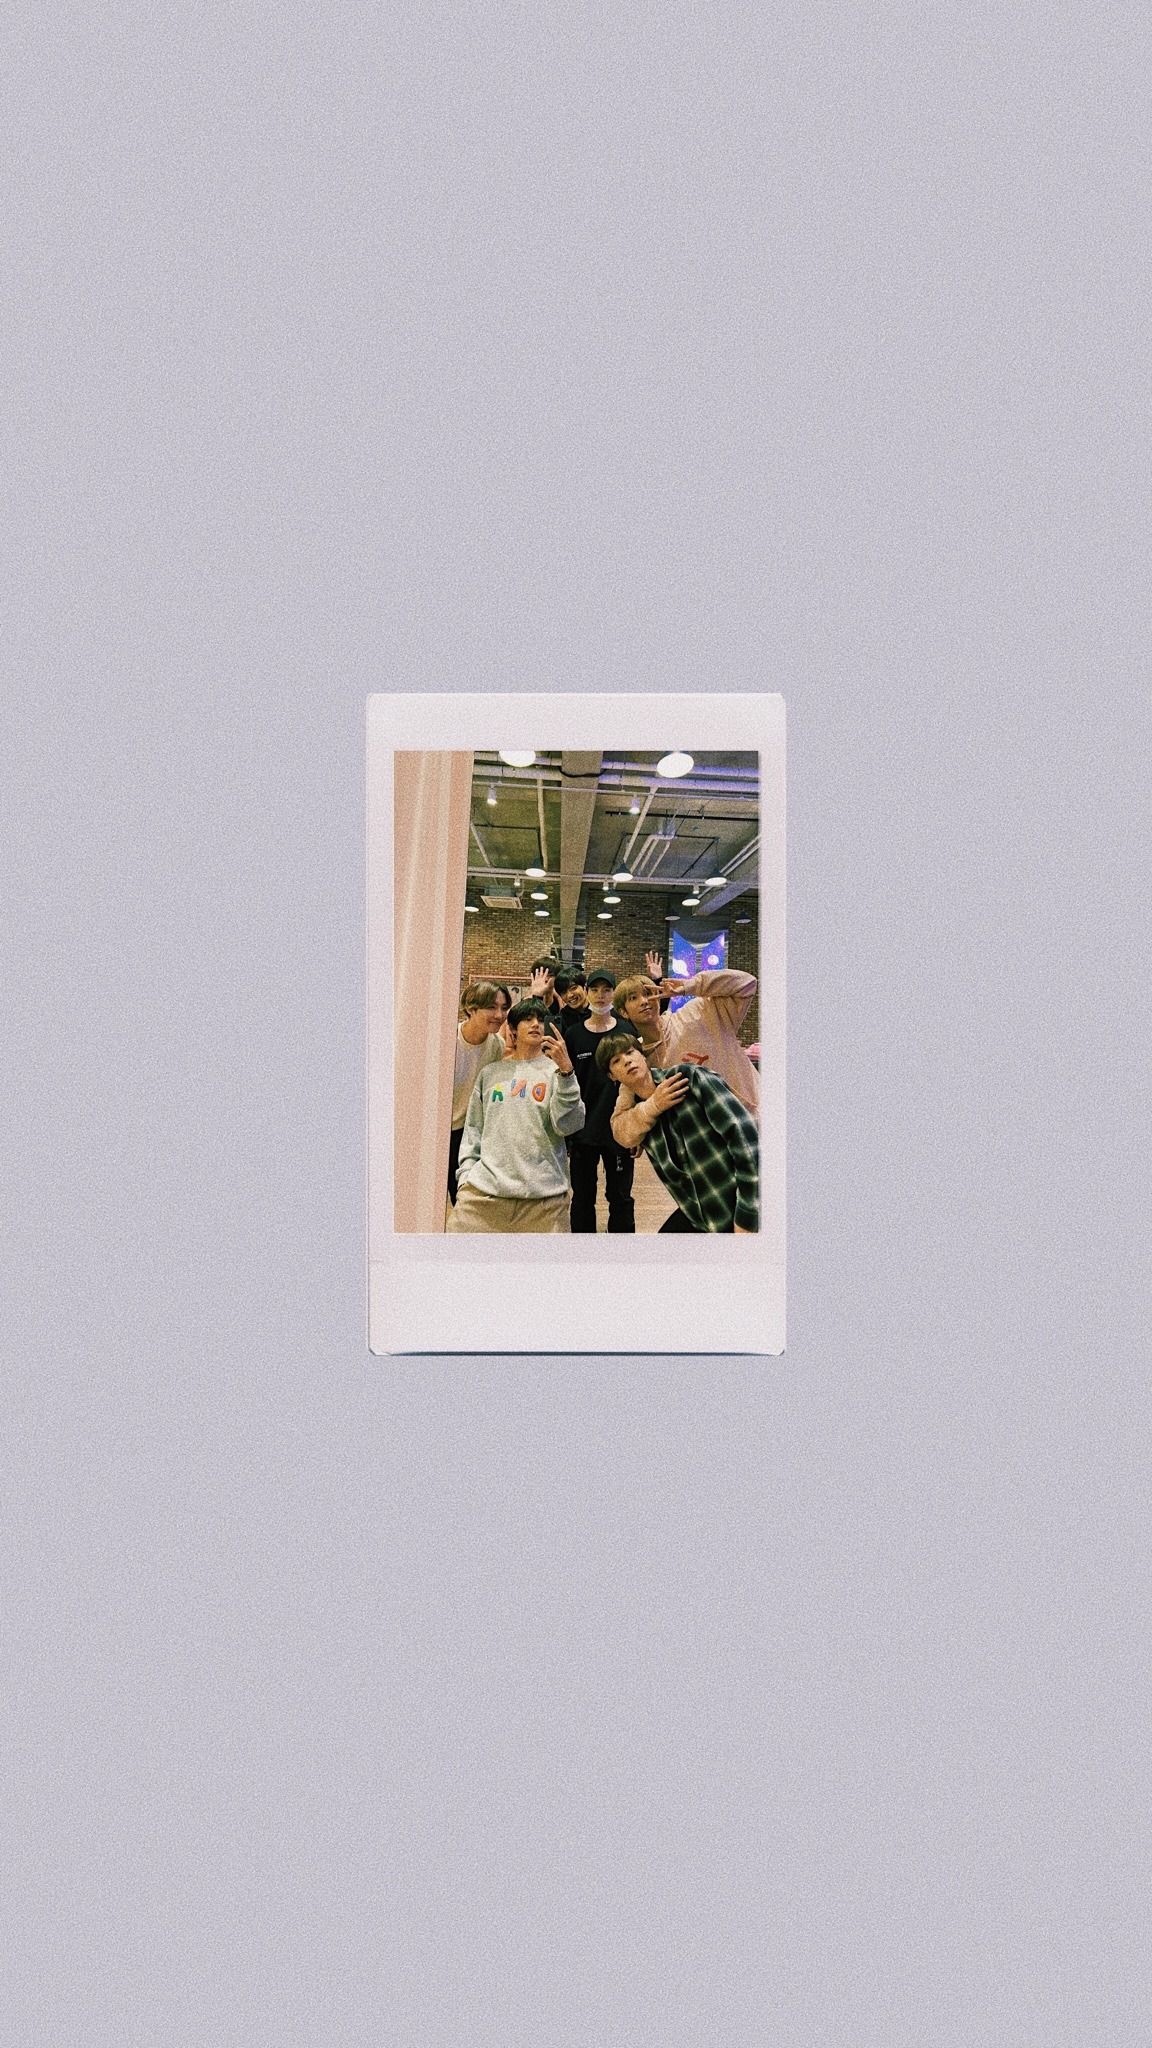 A polaroid picture of a group of people in a white room. - Polaroid